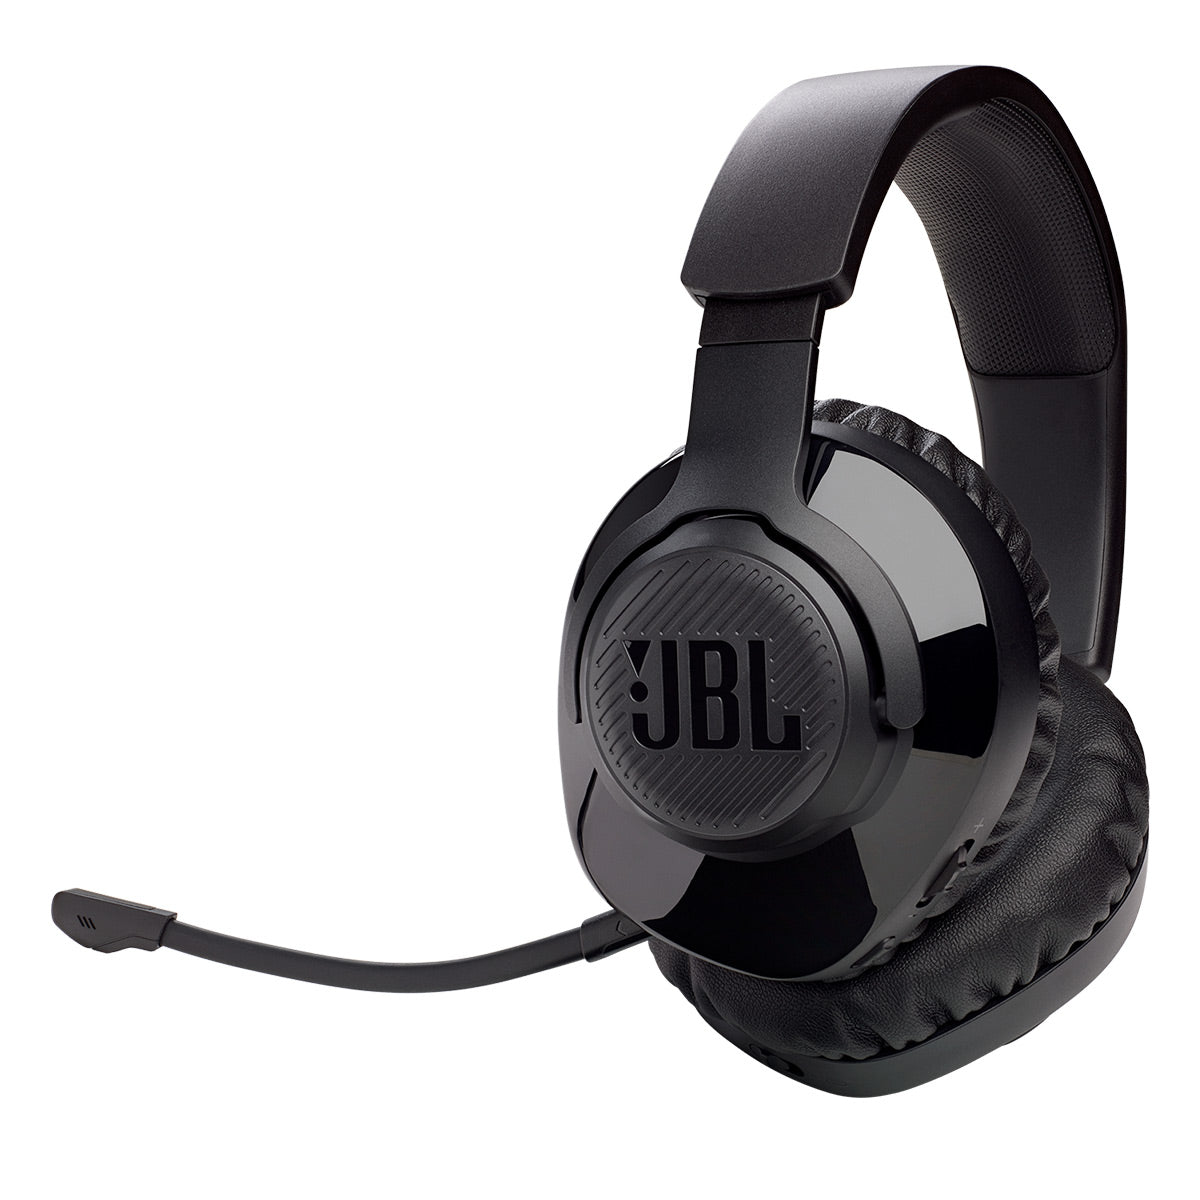 JBL Quantum 350 Wireless Over-Ear PC Gaming Headset with Detachable Boom Mic (Black)